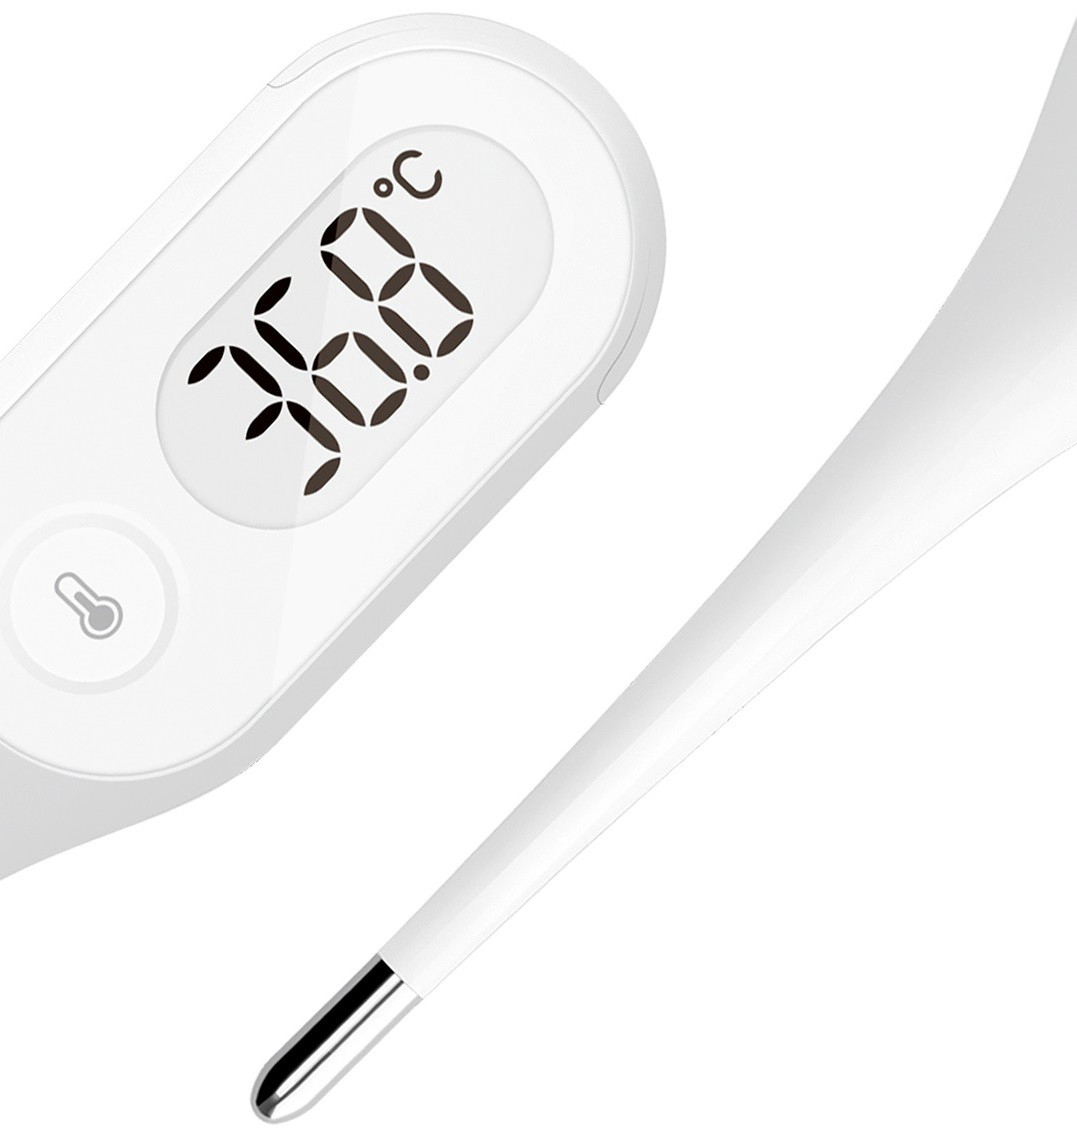 xiaomi-ihealth-medical-electronic-thermometer-dt-102-001i375211608558210 copy